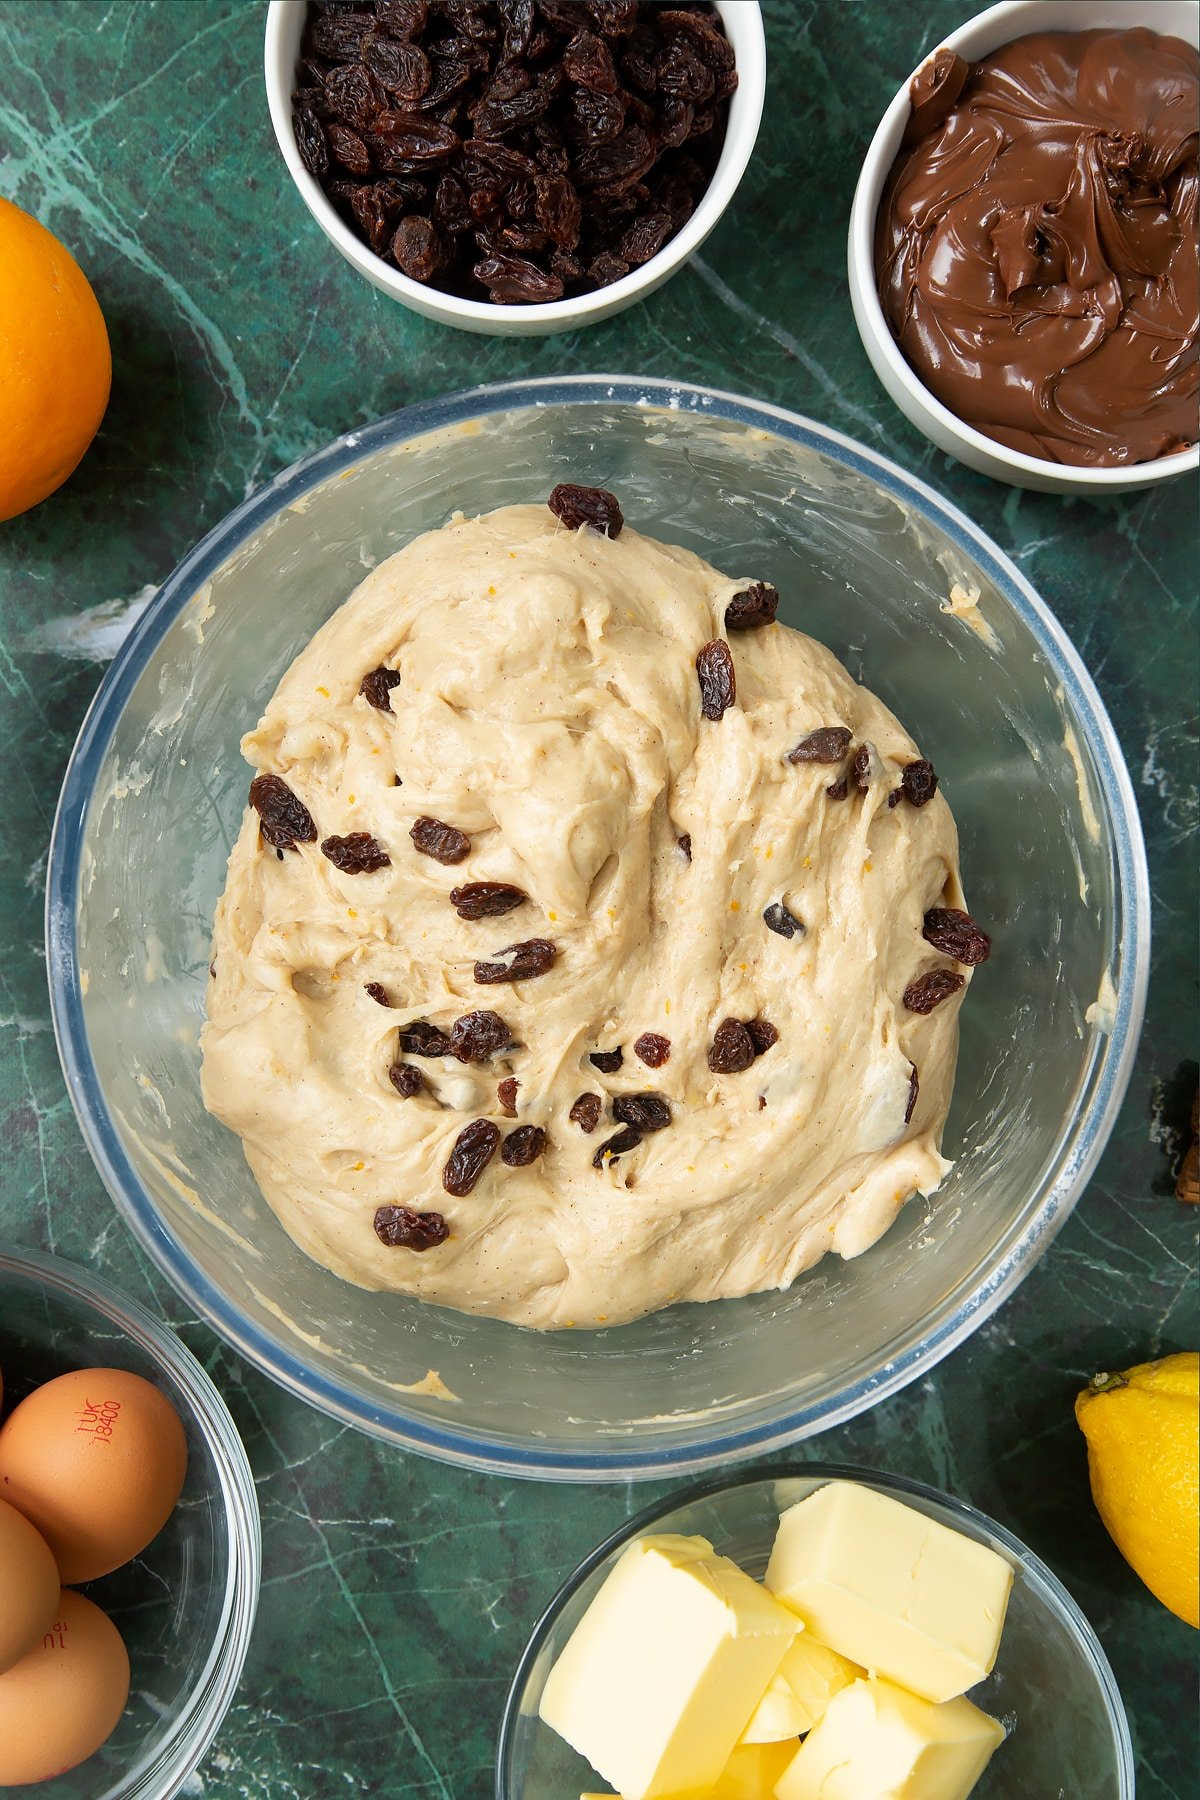 Spiced bread dough with raisins in a bowl. Ingredients to make Nutella panettone surround the bowl.